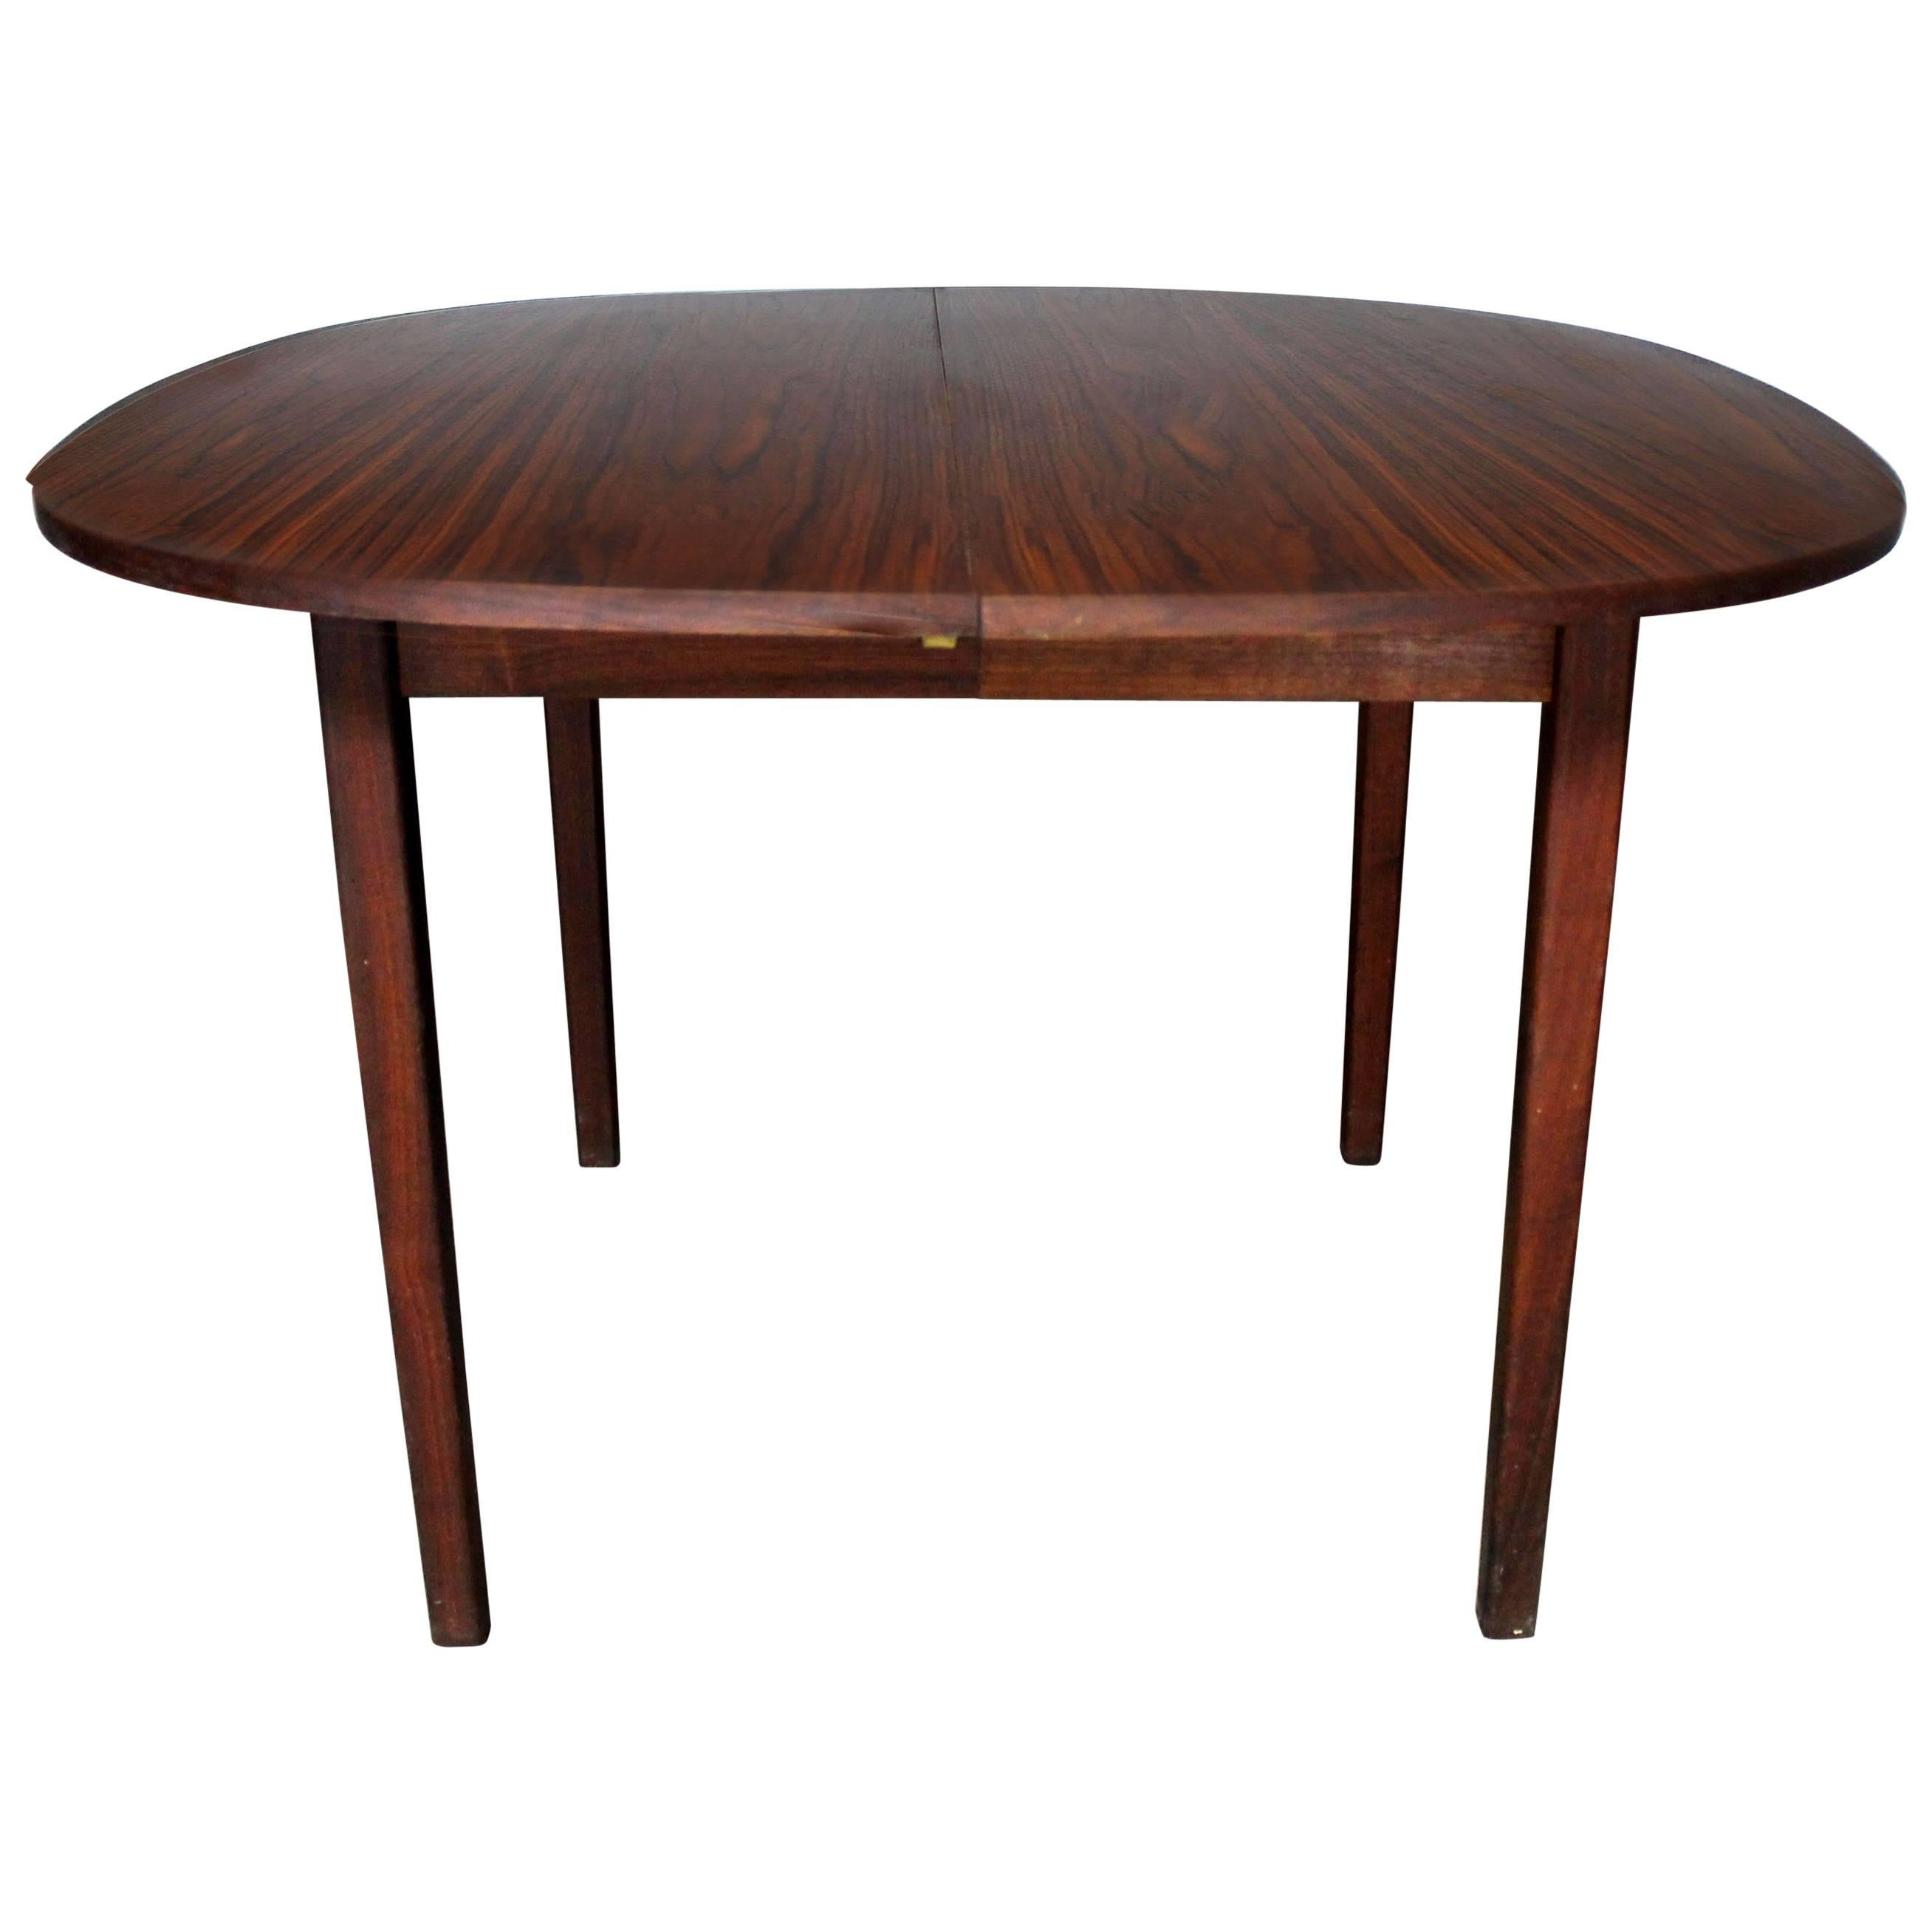 Rosewood Squircle to Oval Shaped Expanding Dining Table, Mid-Century Modern